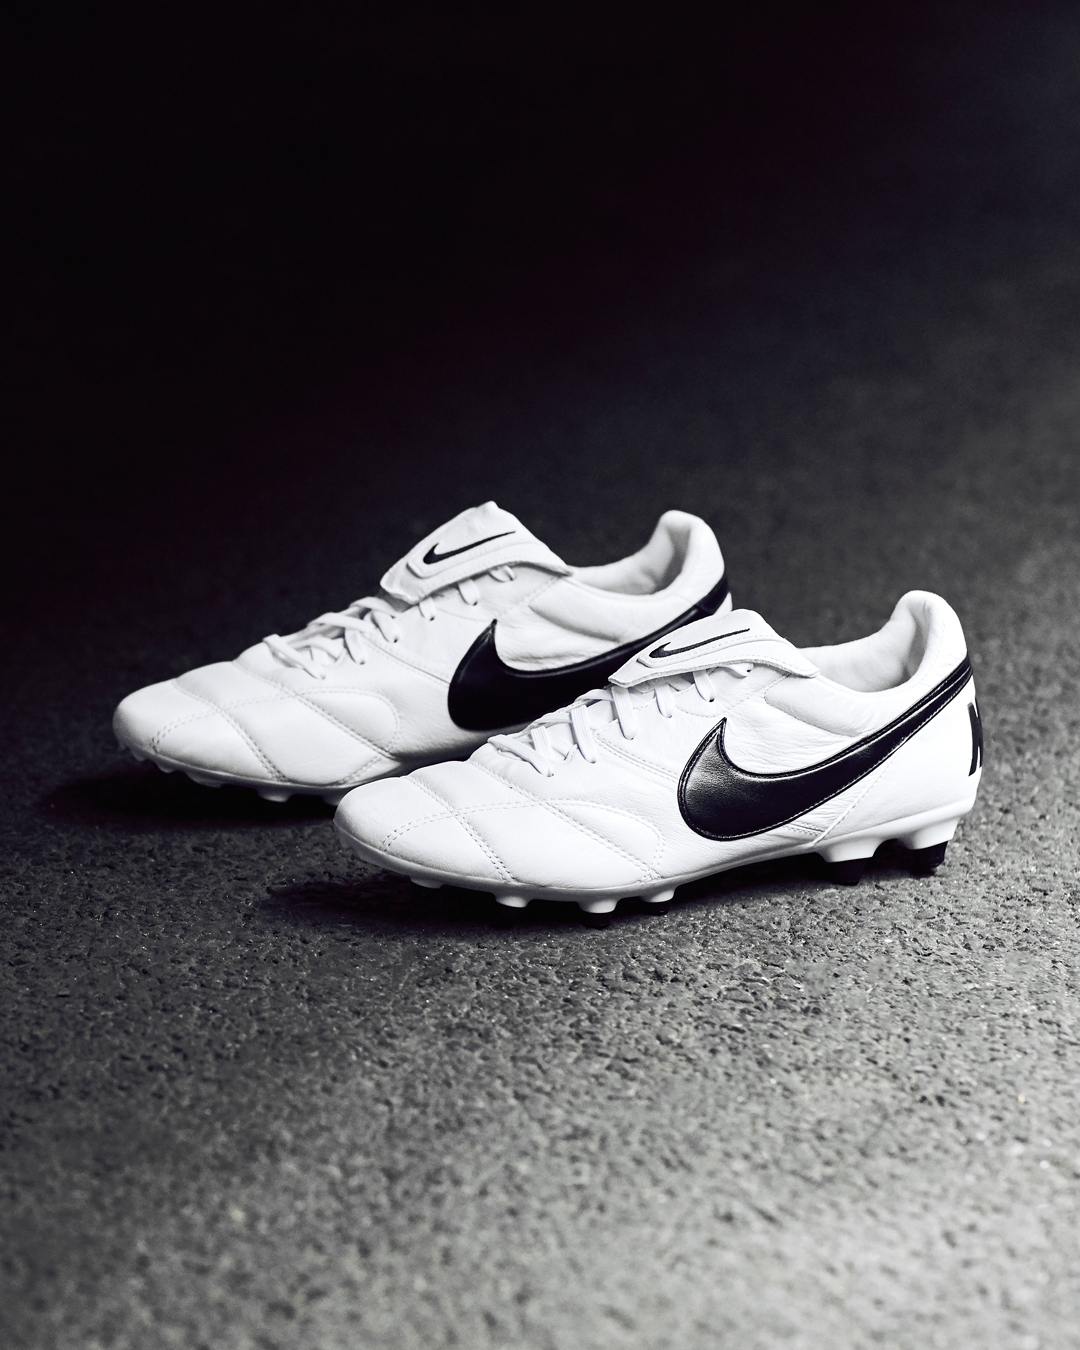 Pro:Direct Soccer on Twitter: "Price Drop The Nike Premier II FG "White/Black" is £70 Pro:Direct Soccer ⚪️ Back to for less 📲 Shop here 🛒https://t.co/e4eNaZZODh https://t.co/QiYxop5yQq" / Twitter